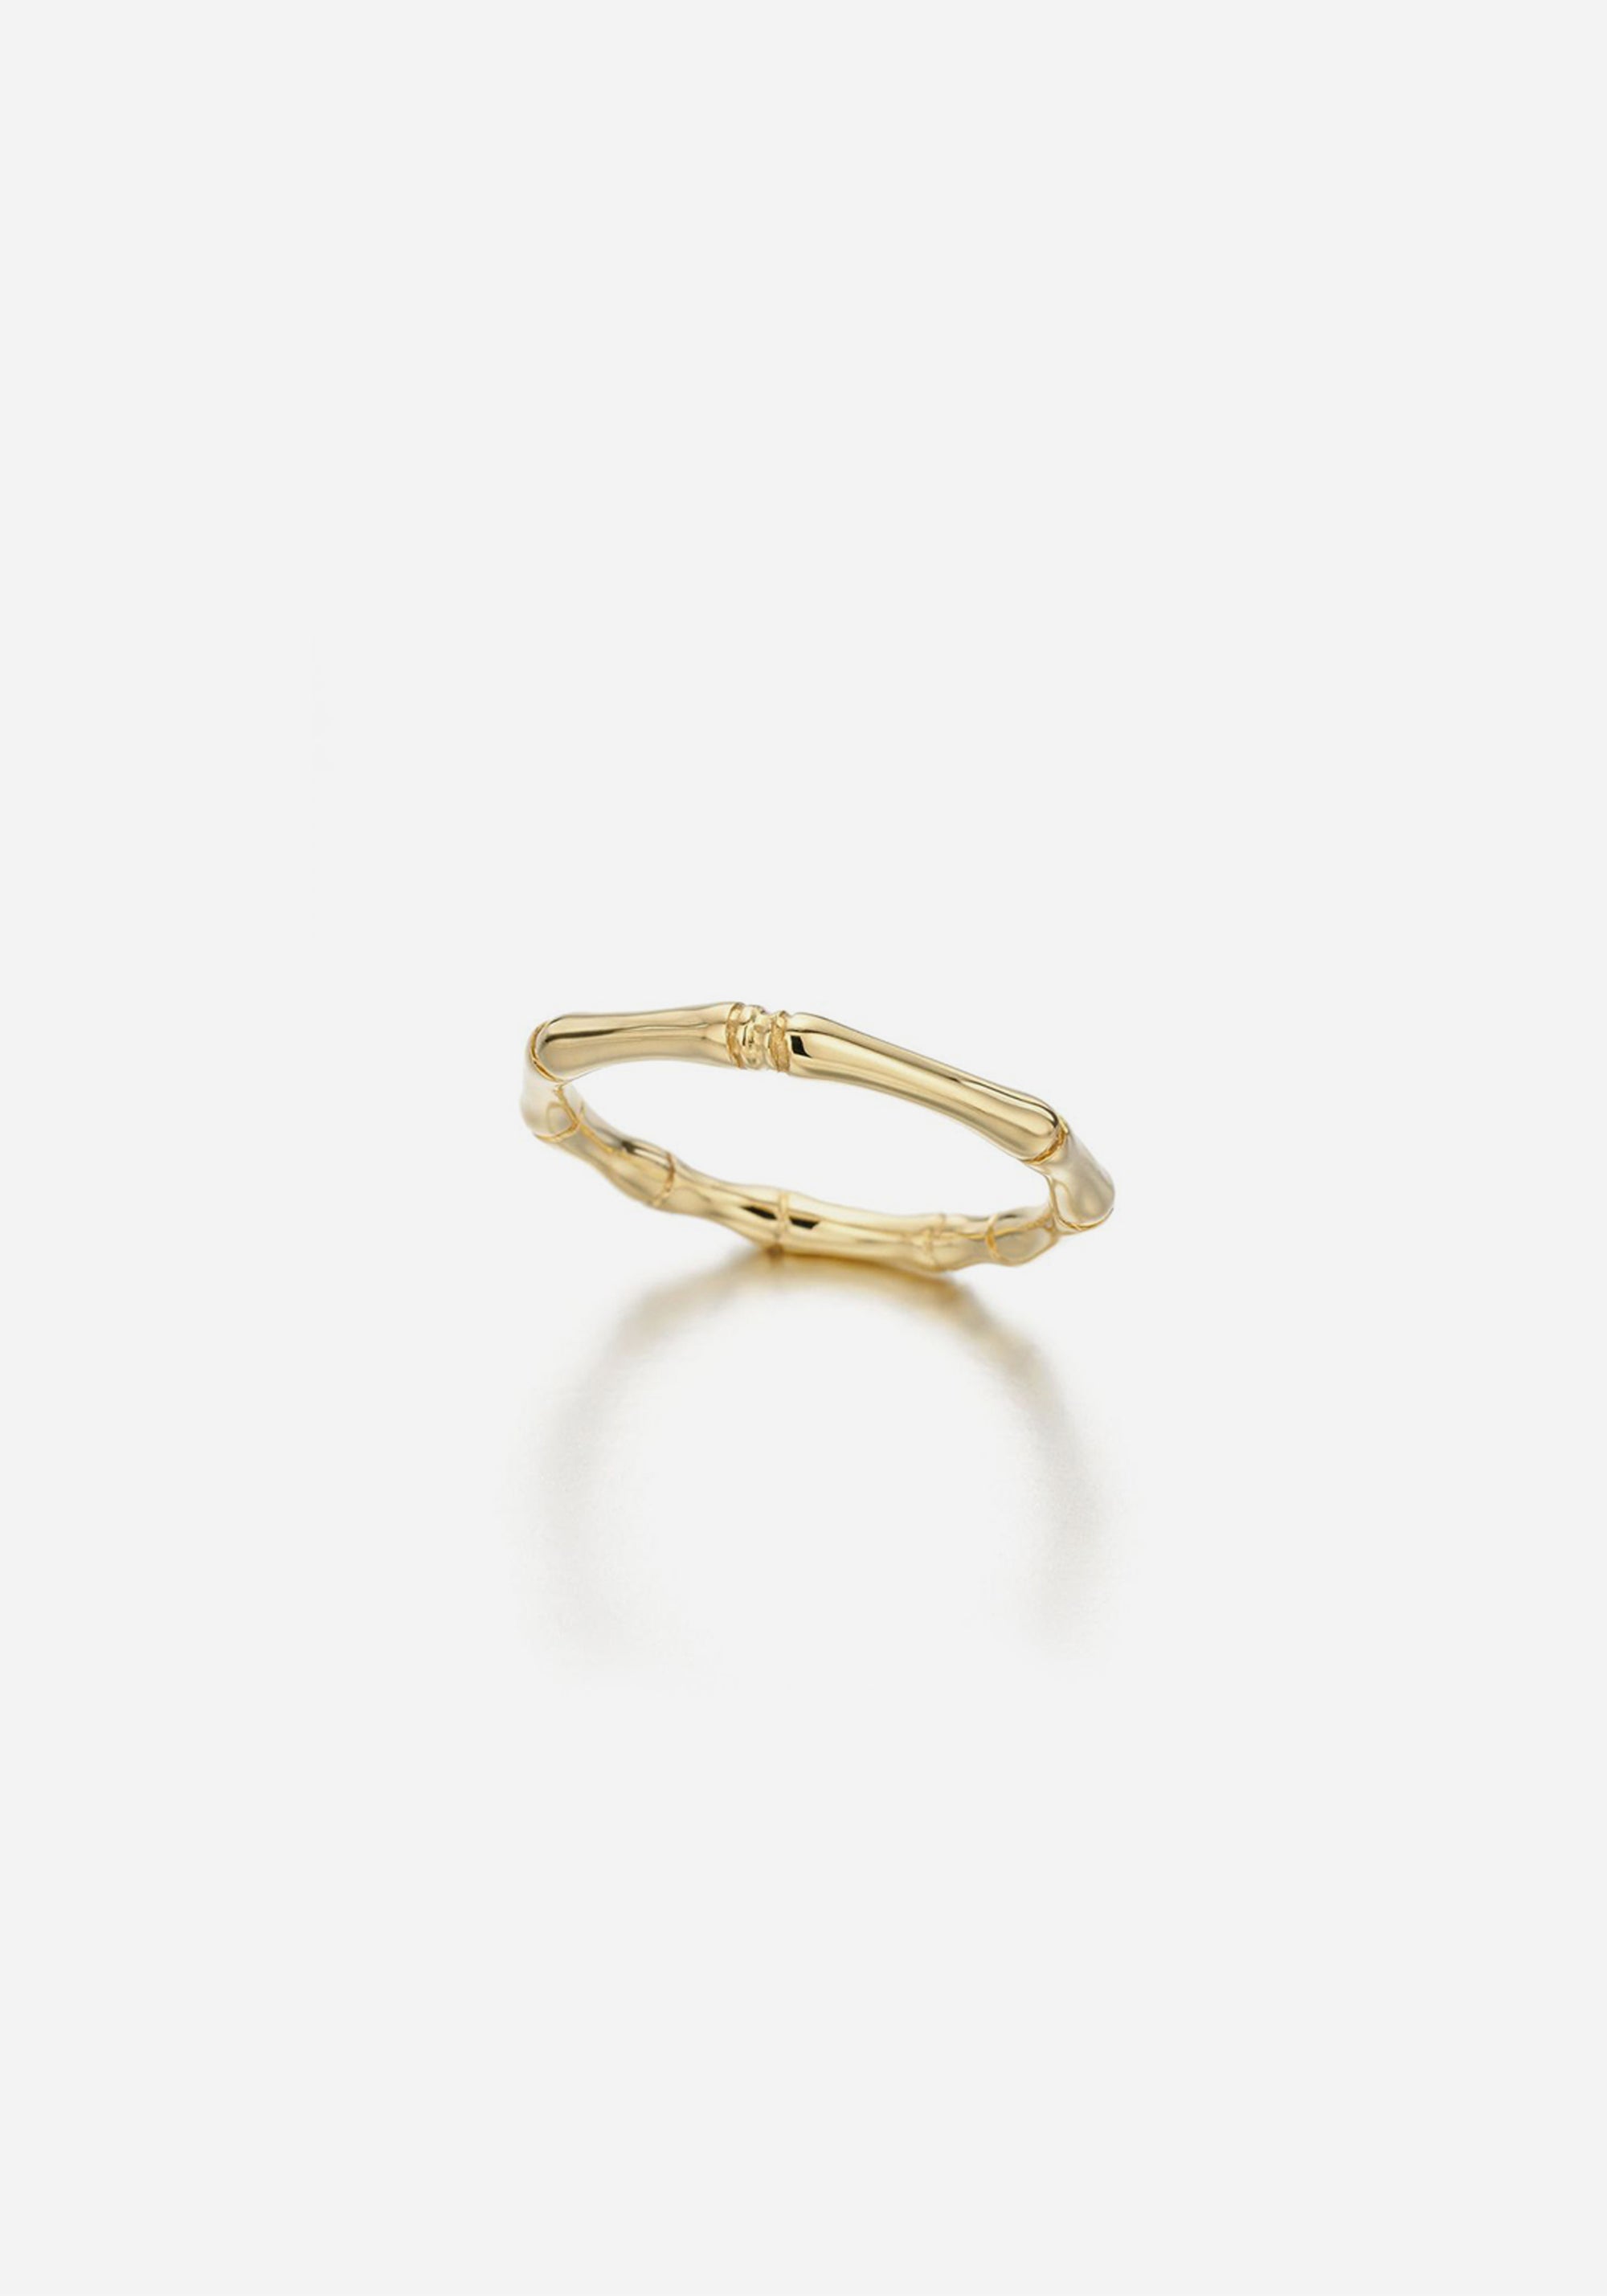 Bamboo Ring - Wide Band Yellow Gold